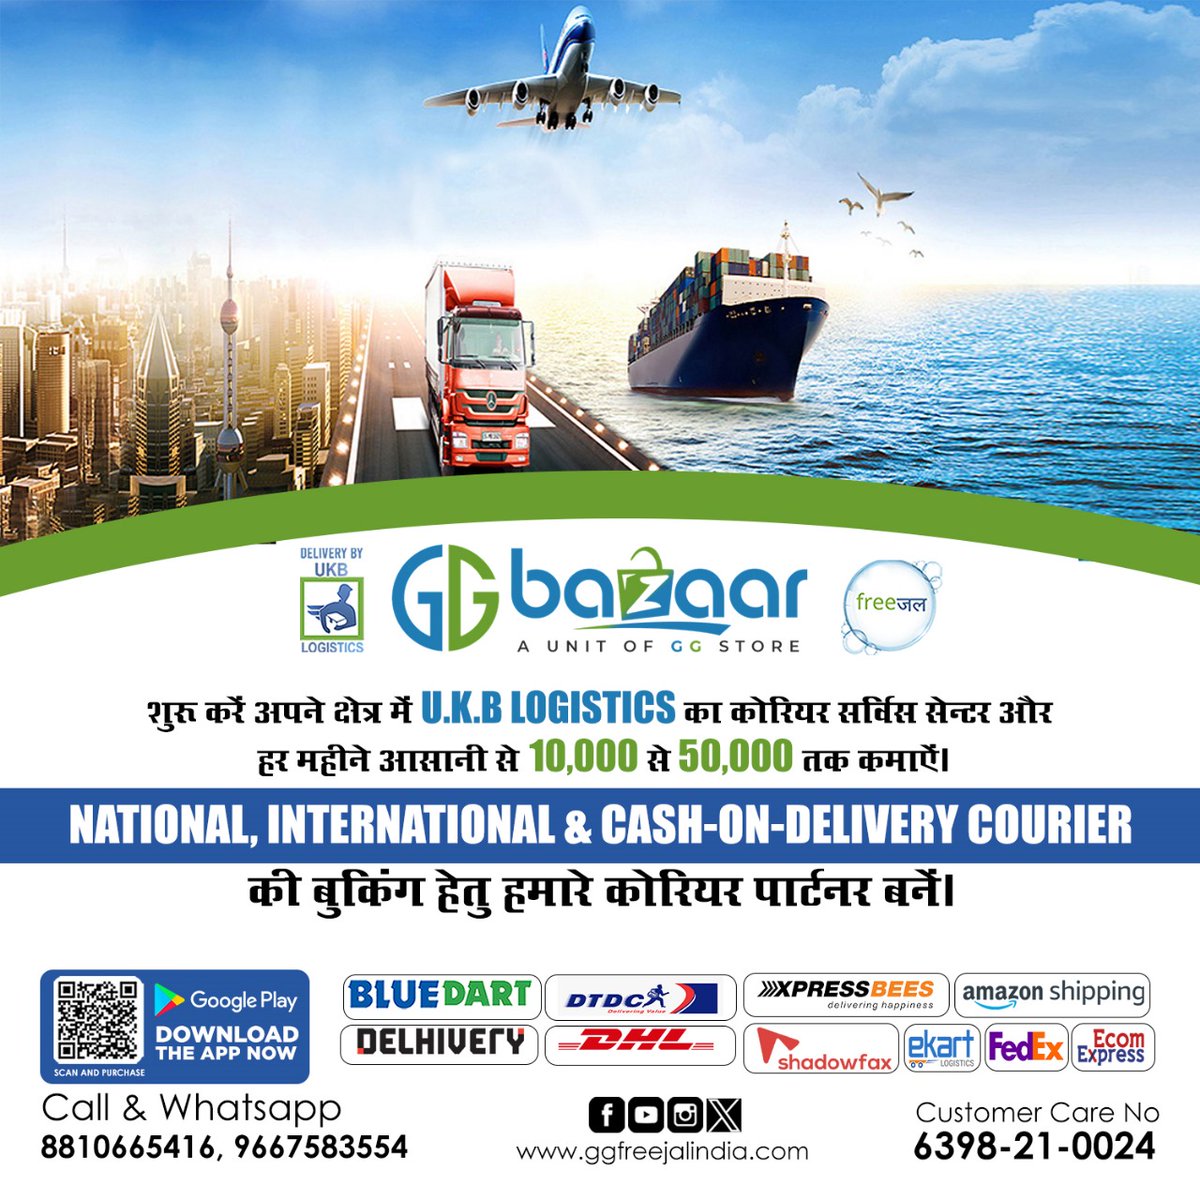 Expand your reach in the U.K.B. by opening a logistic courier service center or becoming one of our reliable couriers. Enjoy the convenience of booking national, international, and cash-on-delivery services to earn between Rs 10,000 and Rs 50,000 monthly effortlessly
#ggbazaar